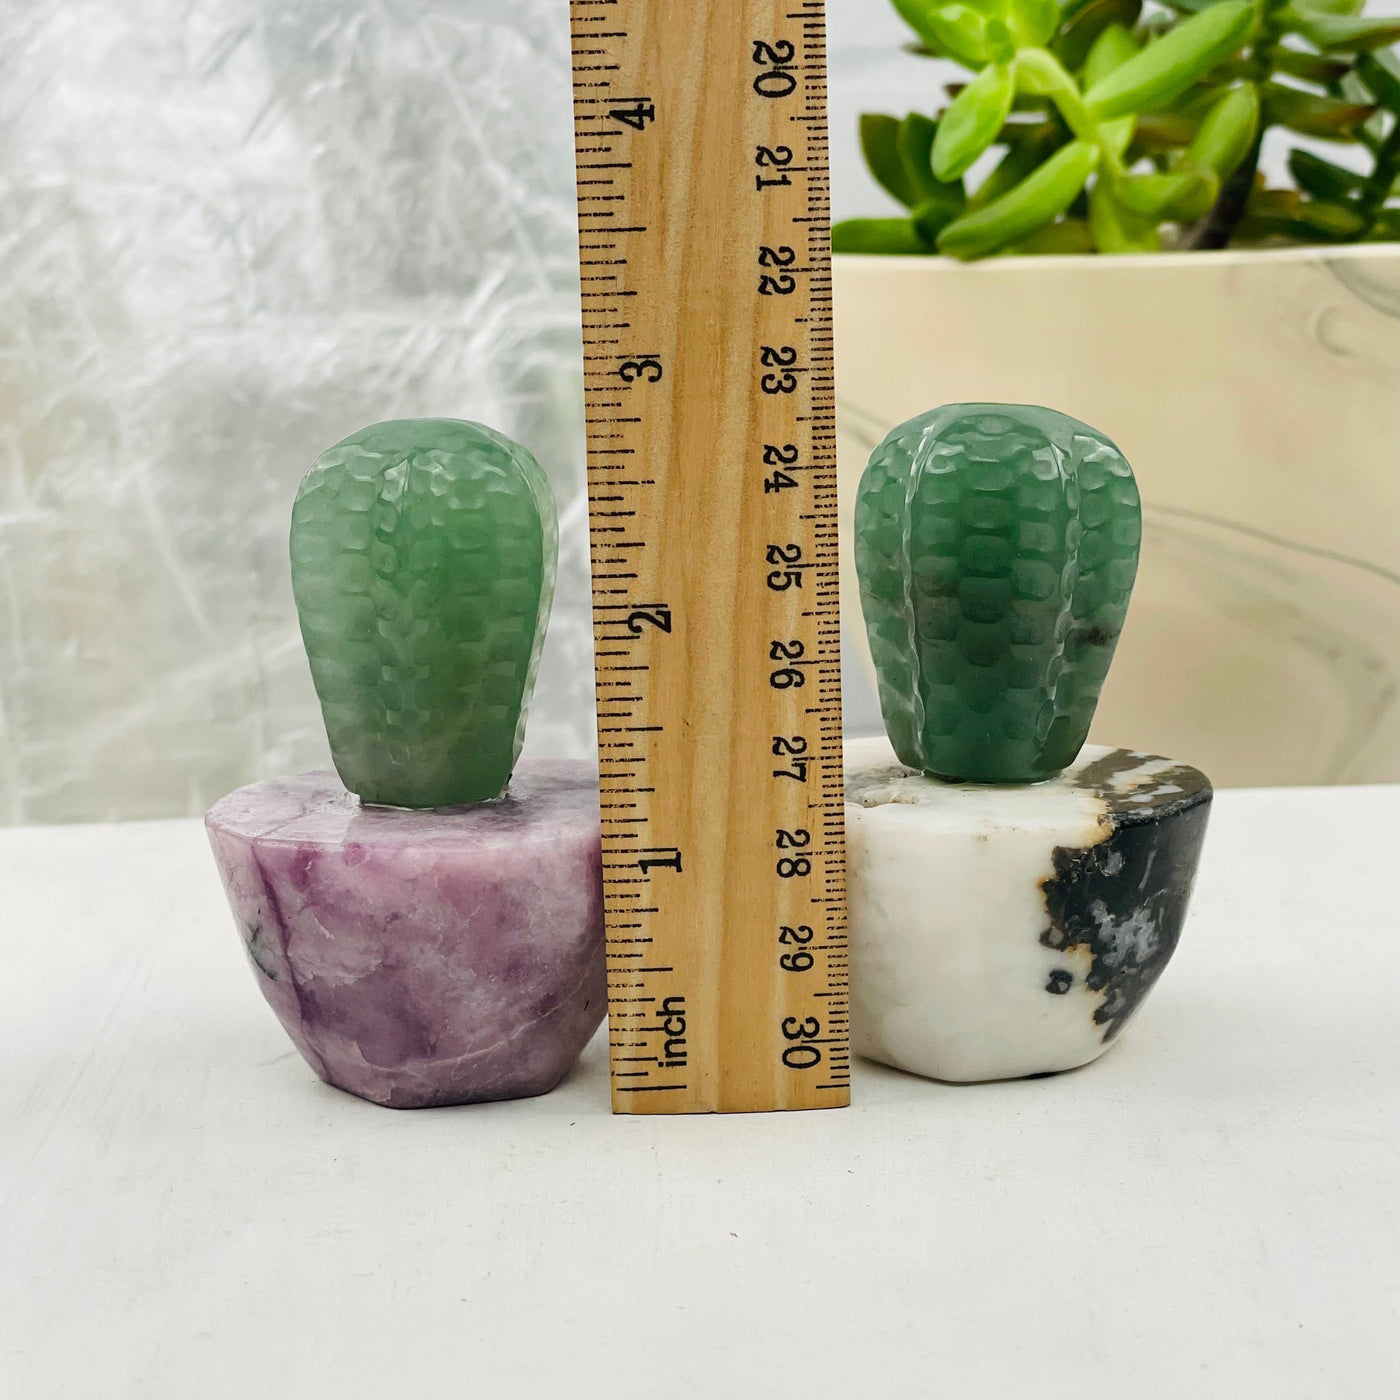 cactus next to a ruler for size reference 